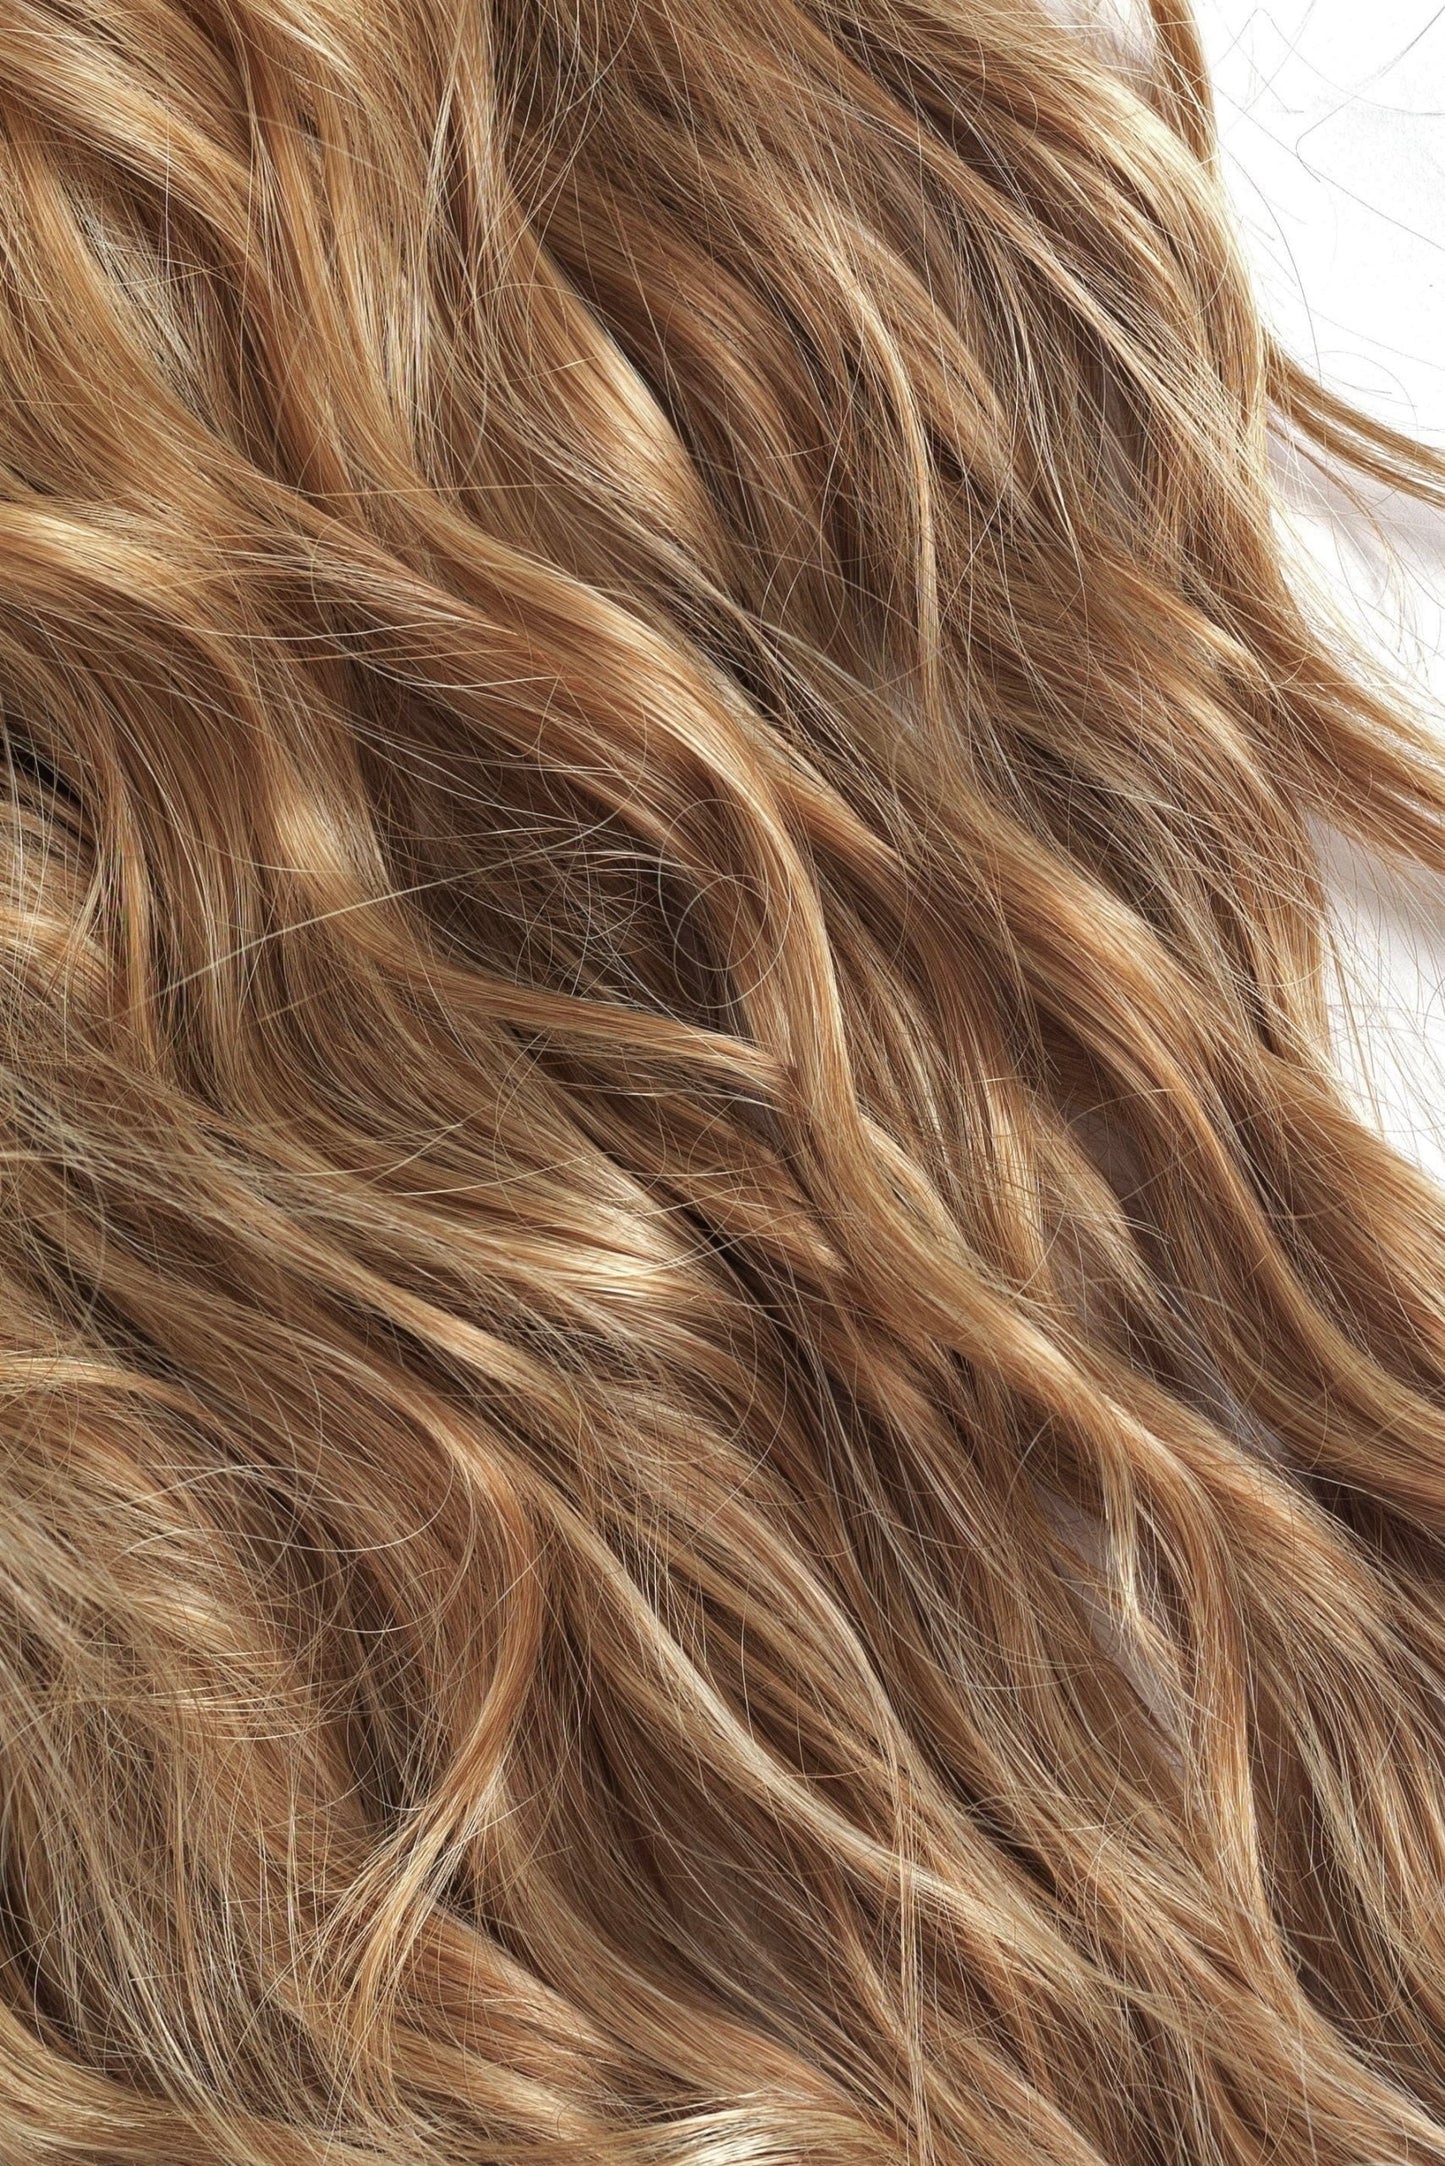 Dark Blonde Remy Tape-In Human Hair Extensions